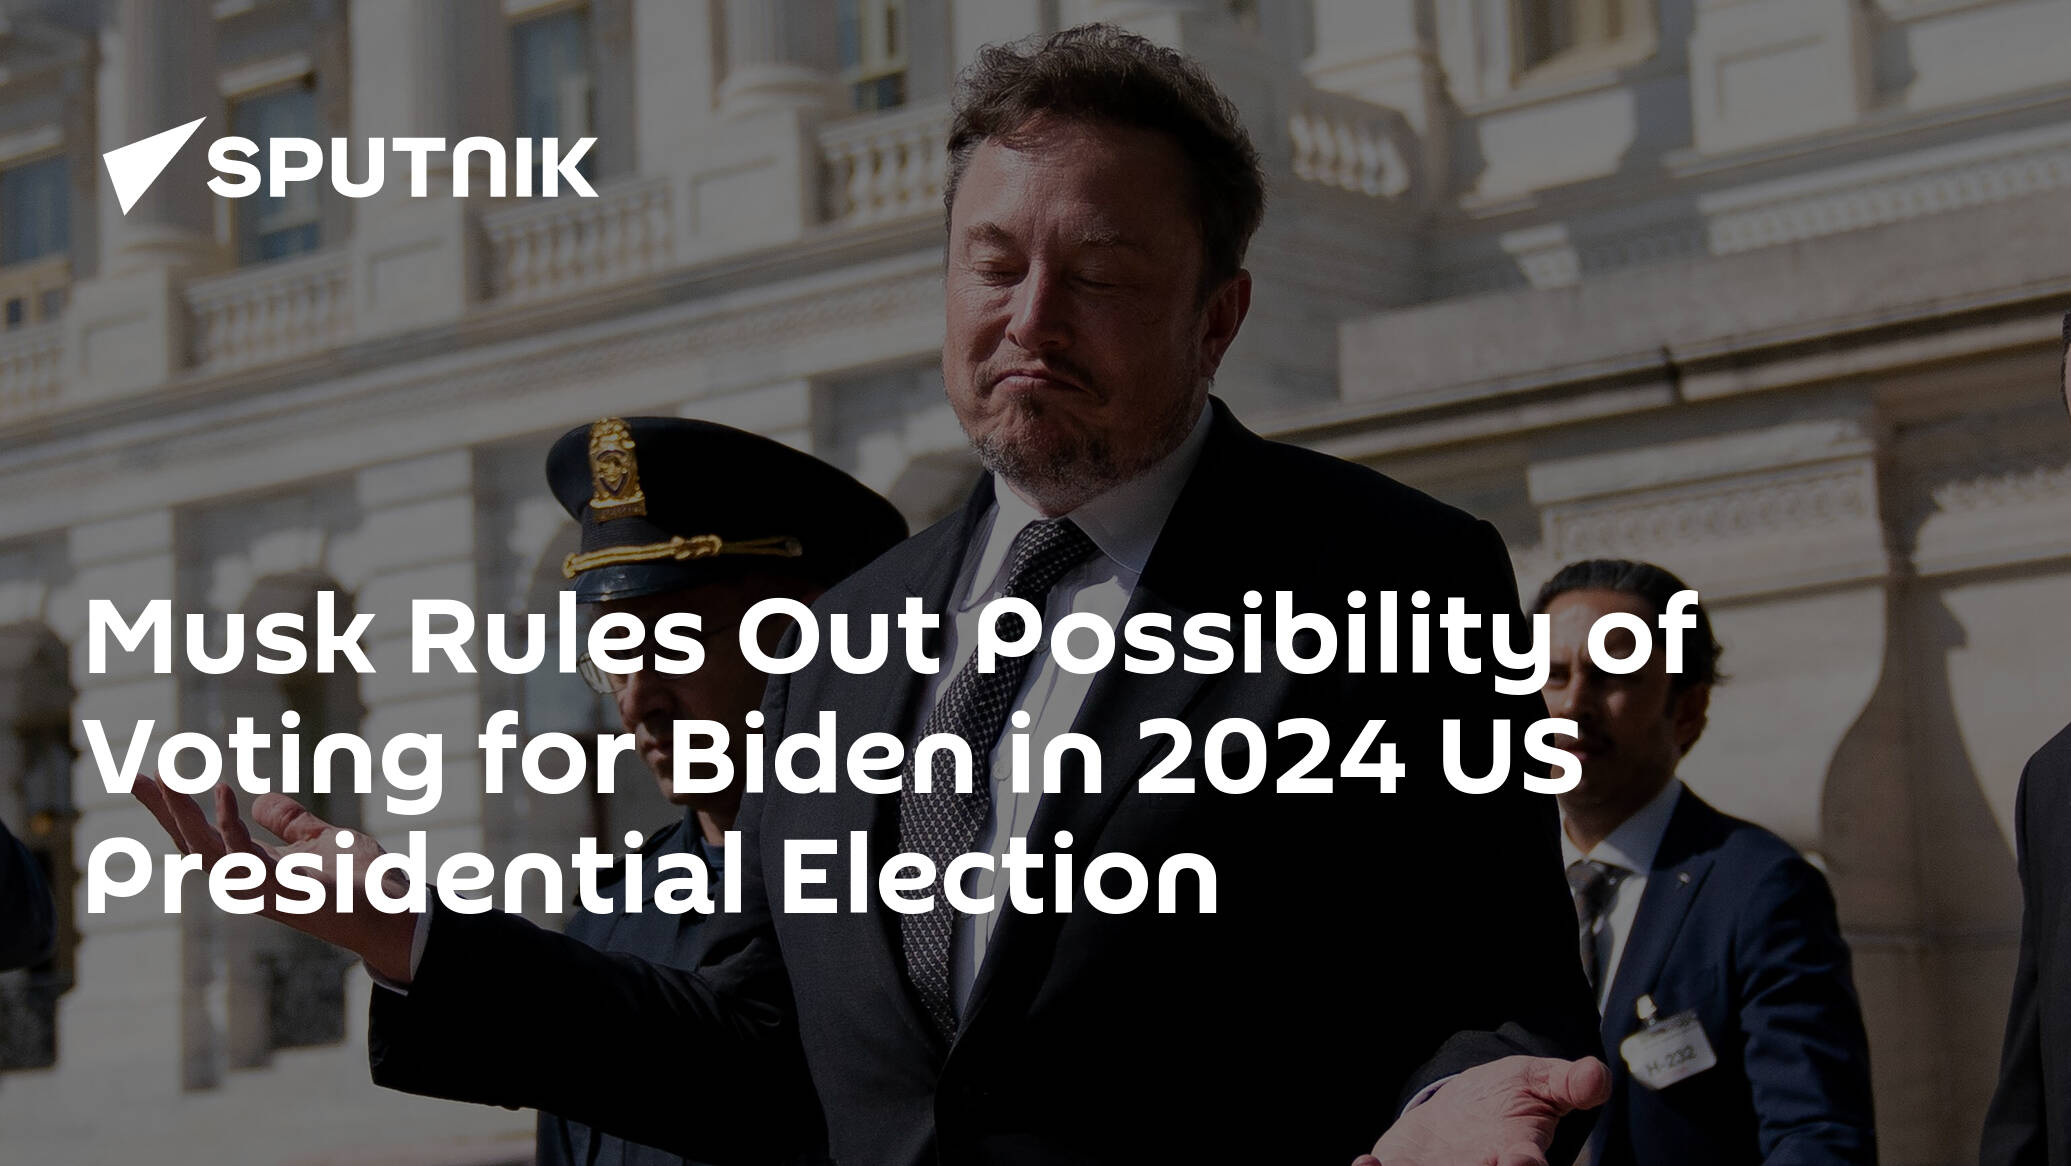 Musk Rules Out Possibility of Voting for Biden in 2024 US Presidential Election